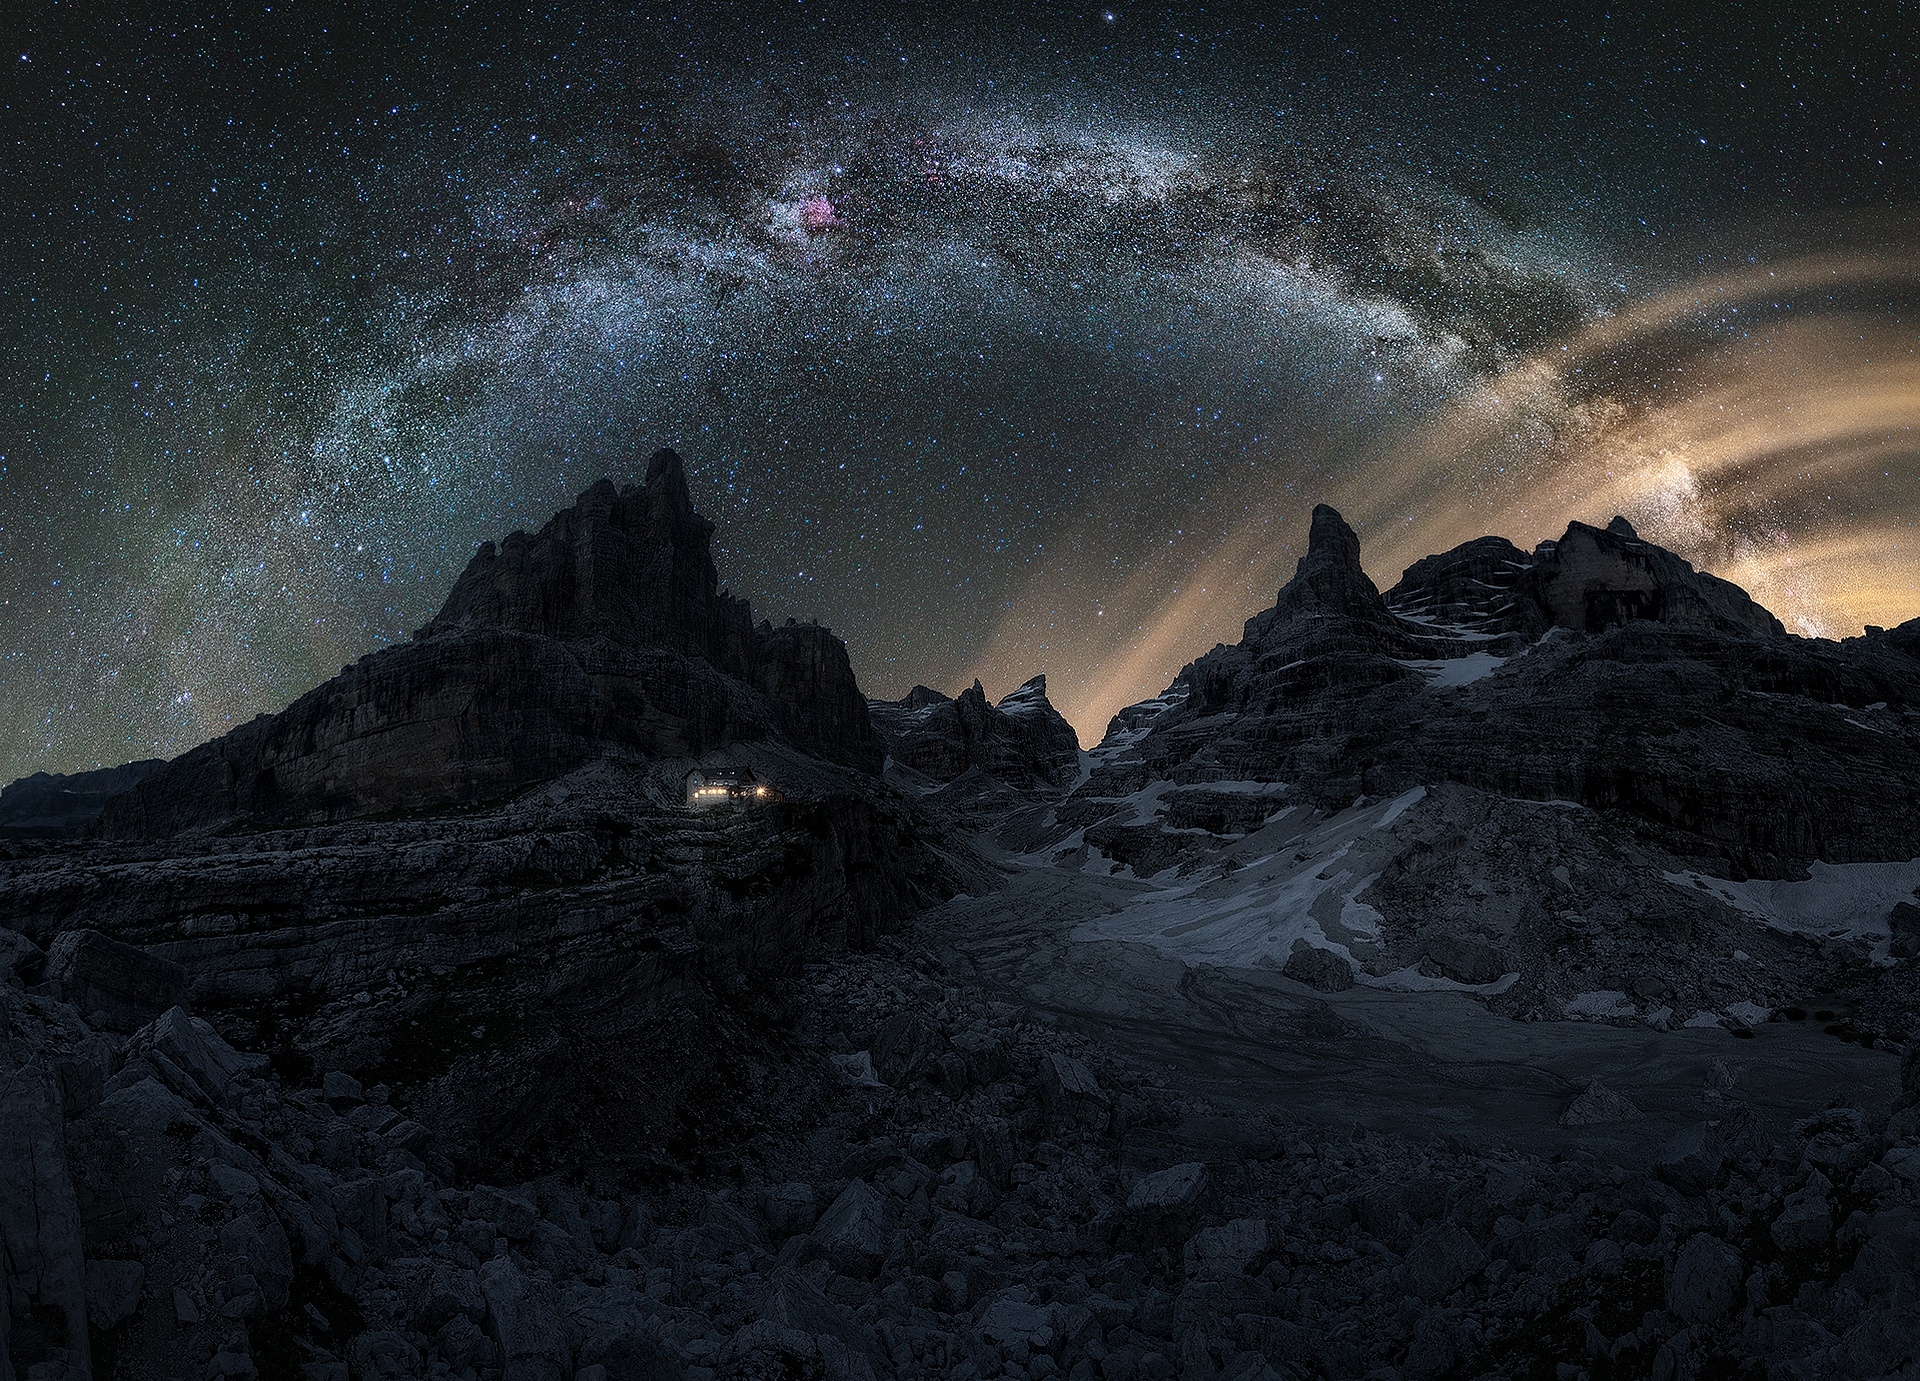 Dolomites Mountains Milky Way Wallpaper, HD Nature 4K Wallpapers ...